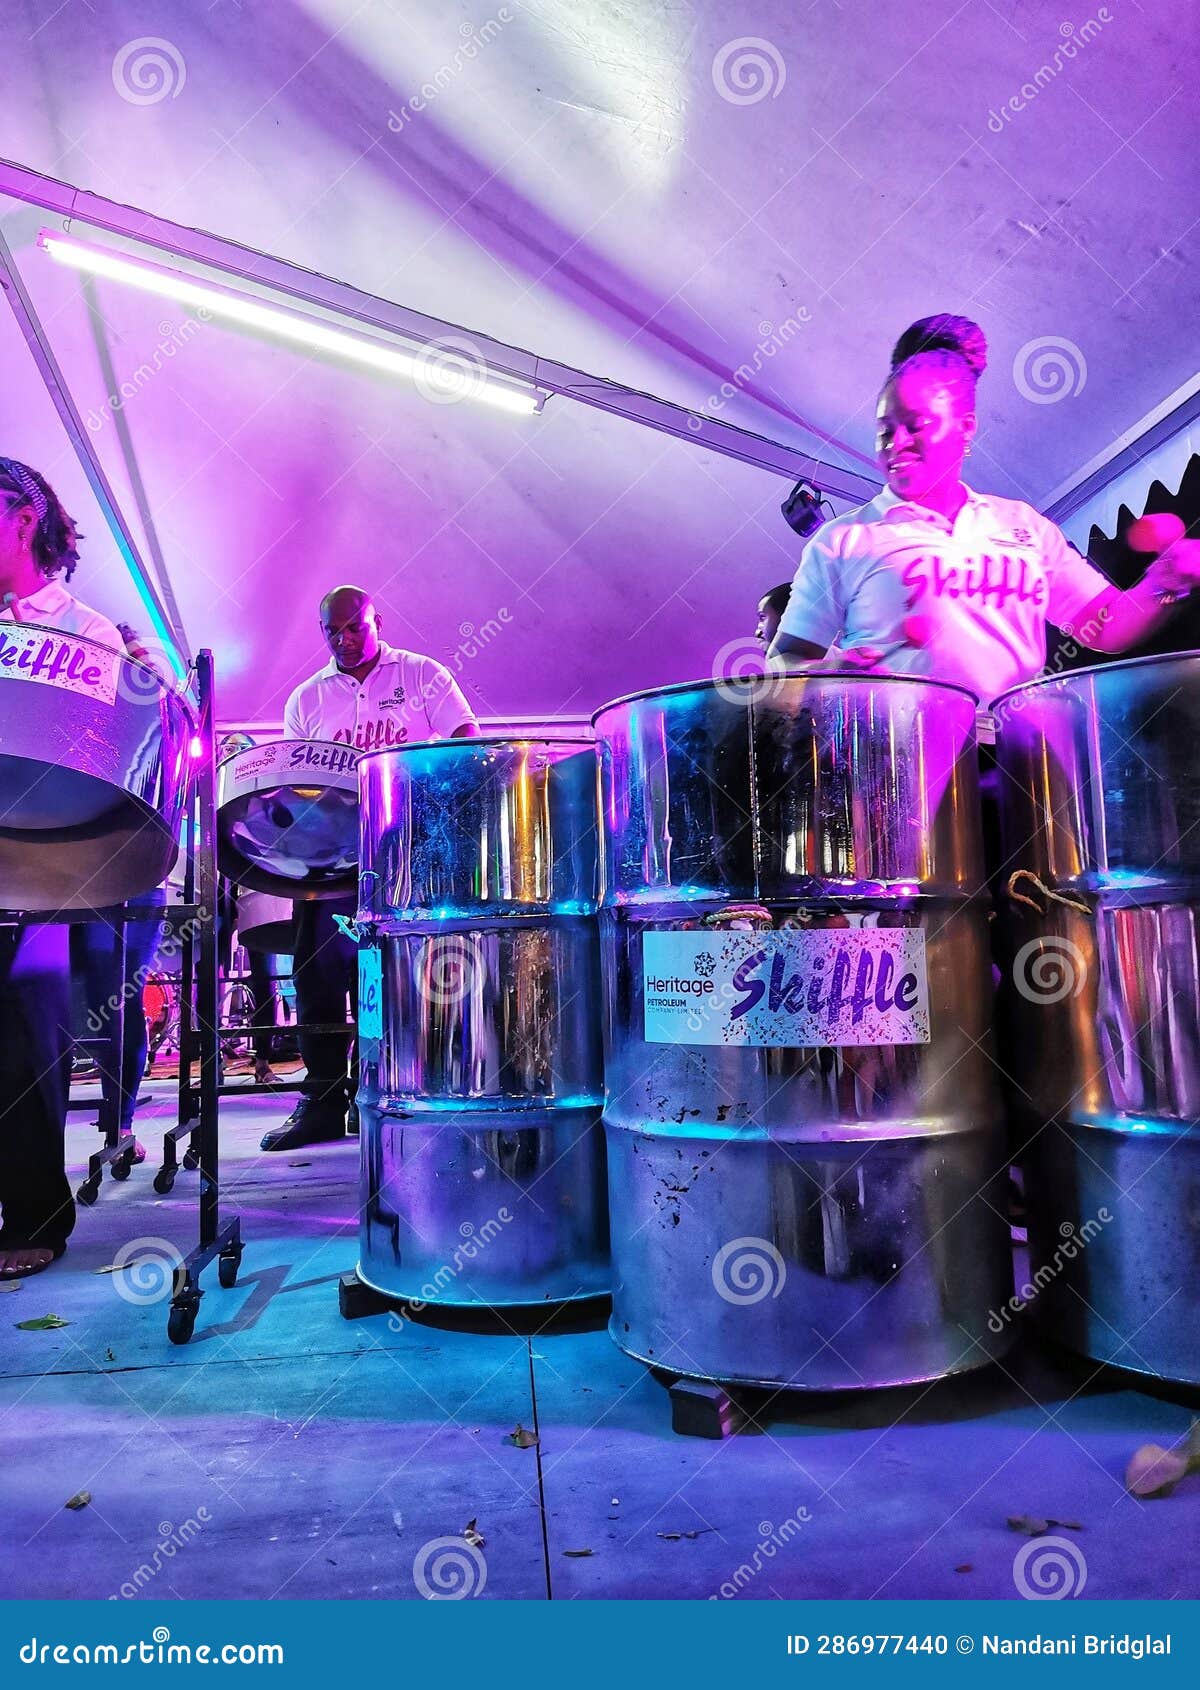 World Steelpan Day Celebration in Port of Spain, Trinidad and Tobago